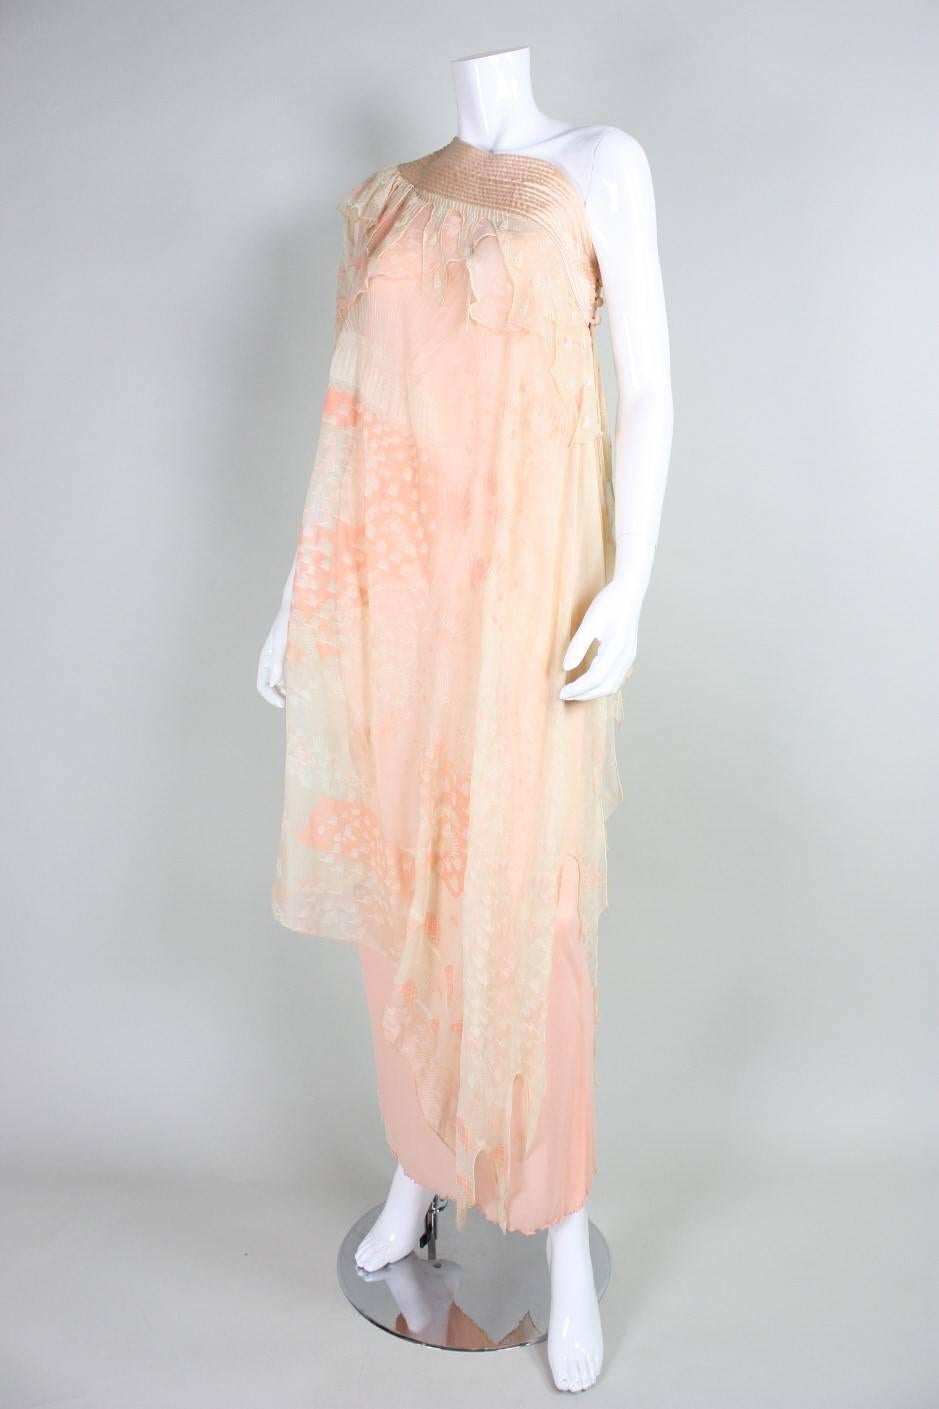 Vintage dress from Zandra Rhodes dates to the 1970's and is made of peach silk chiffon with an abstract pastel screenprint.  Underneath is a peach jersey sheath.  Wide satin band trims the top of the gown and features concentric stitching. Side